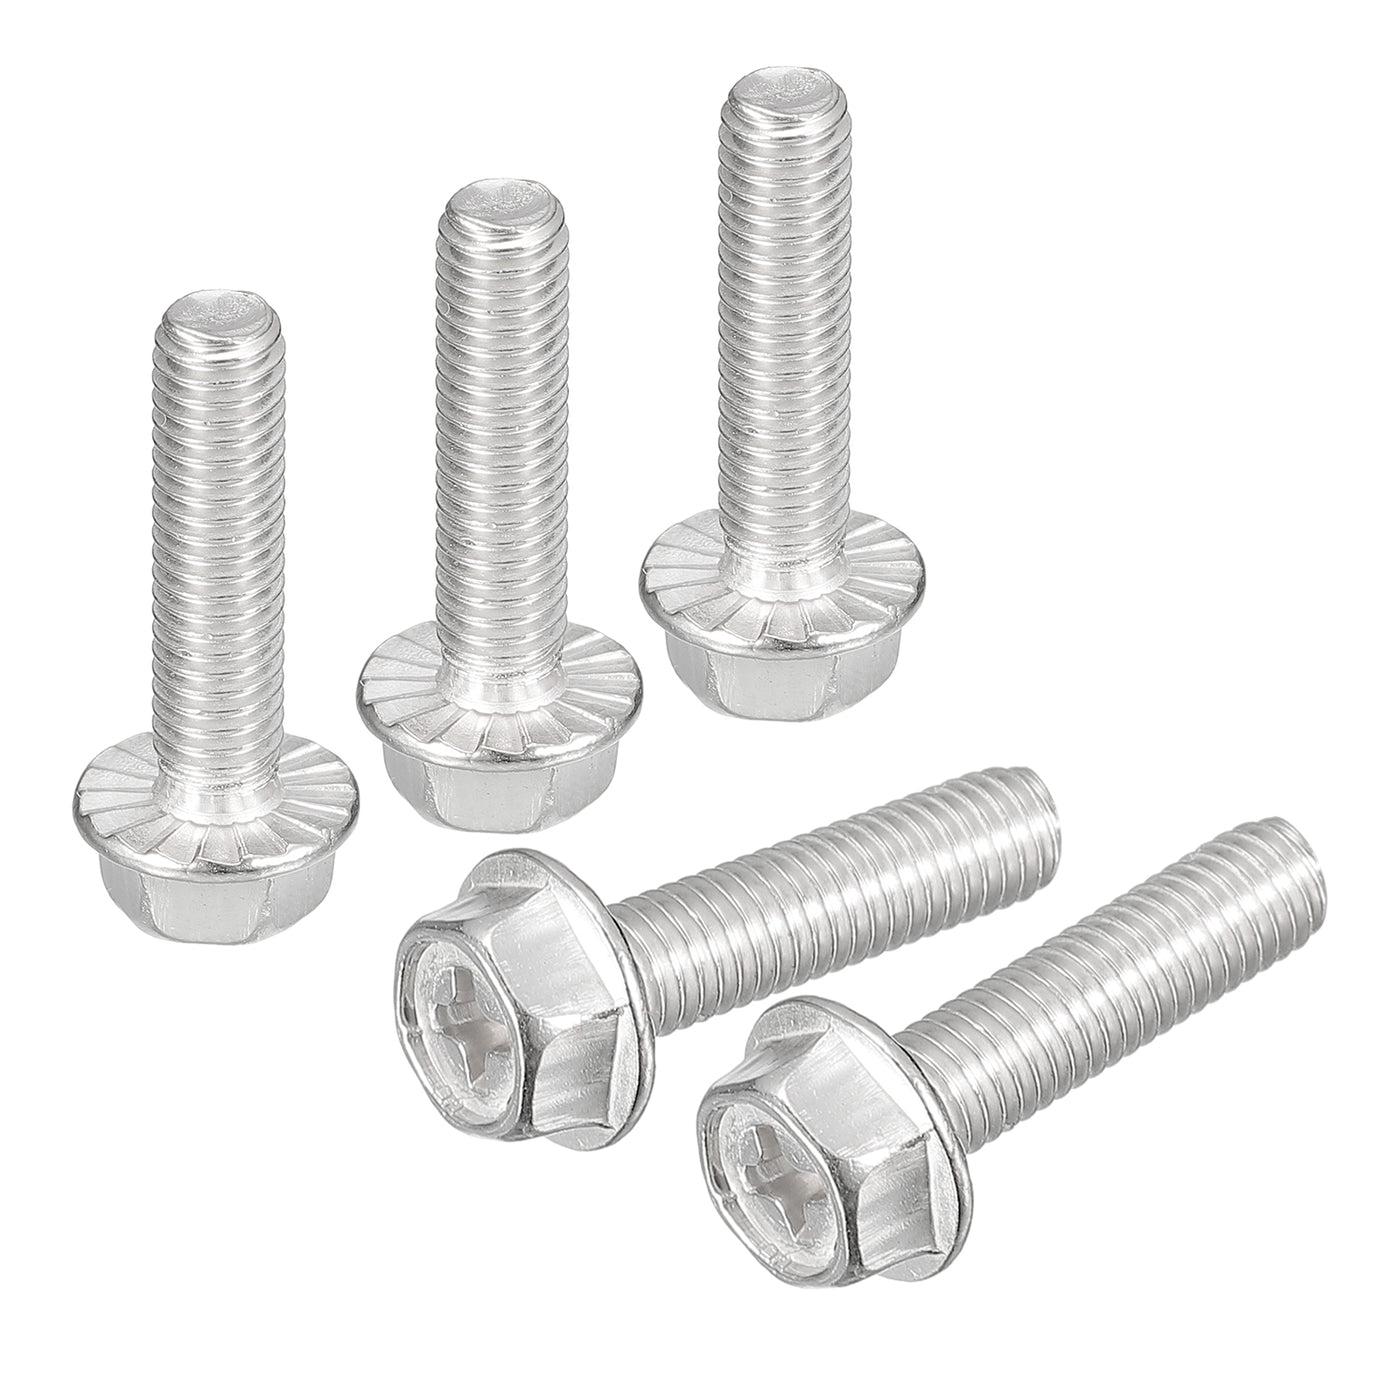 uxcell Uxcell M5x20mm Phillips Hex Head Flange Bolts, 25pcs 304 Stainless Steel Screws